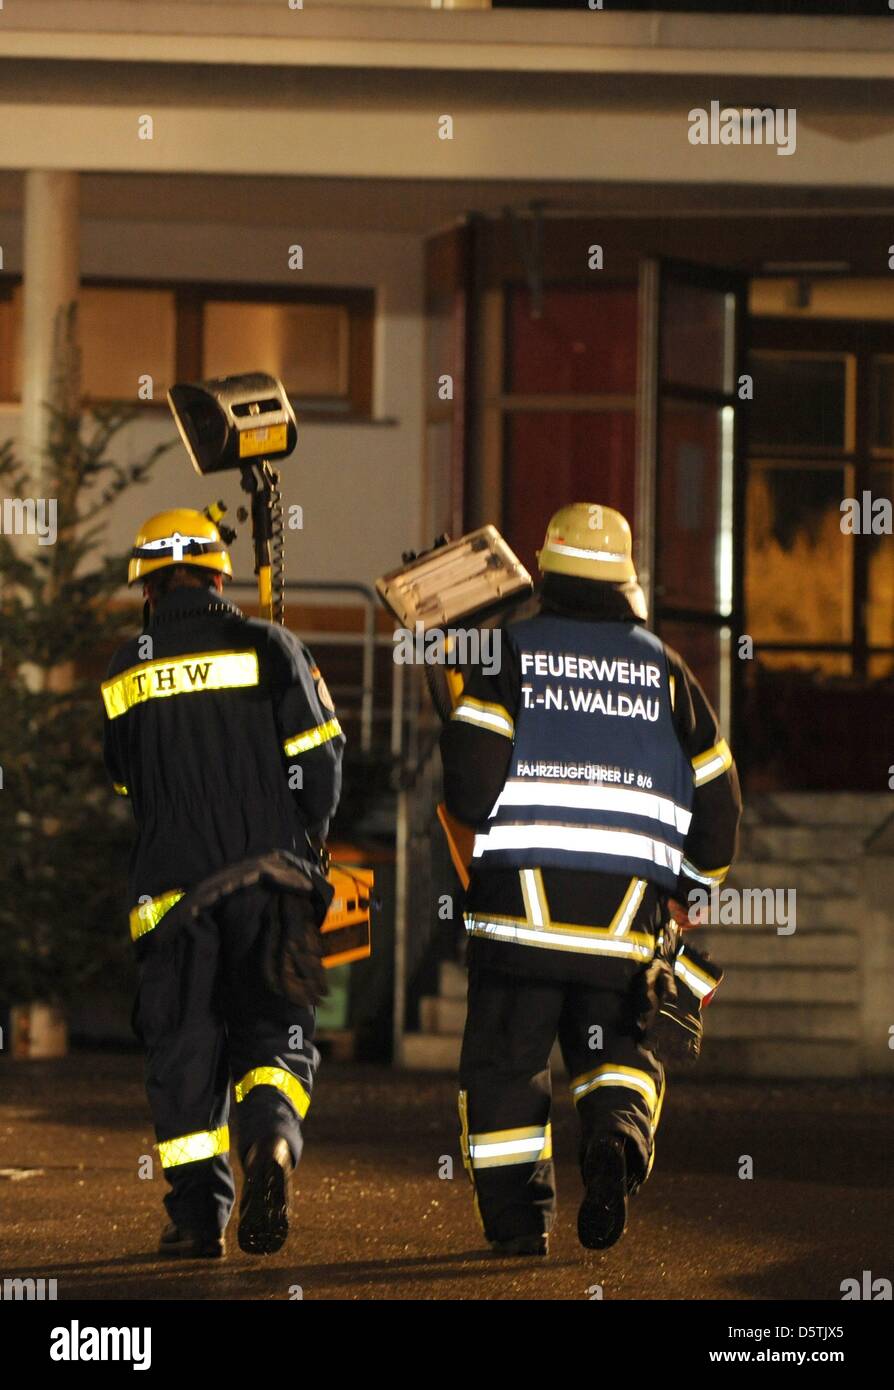 Firemen and technical helpers work at a sheltered workshop which was the site of a major fire in Titisee-Neustadt, Germany, 26 November 2012. For reasons unclear, a fire had broken out in the workshop where 120 disabled people work. 14 people have died in the fire. Photo: PATRICK SEEGER Stock Photo